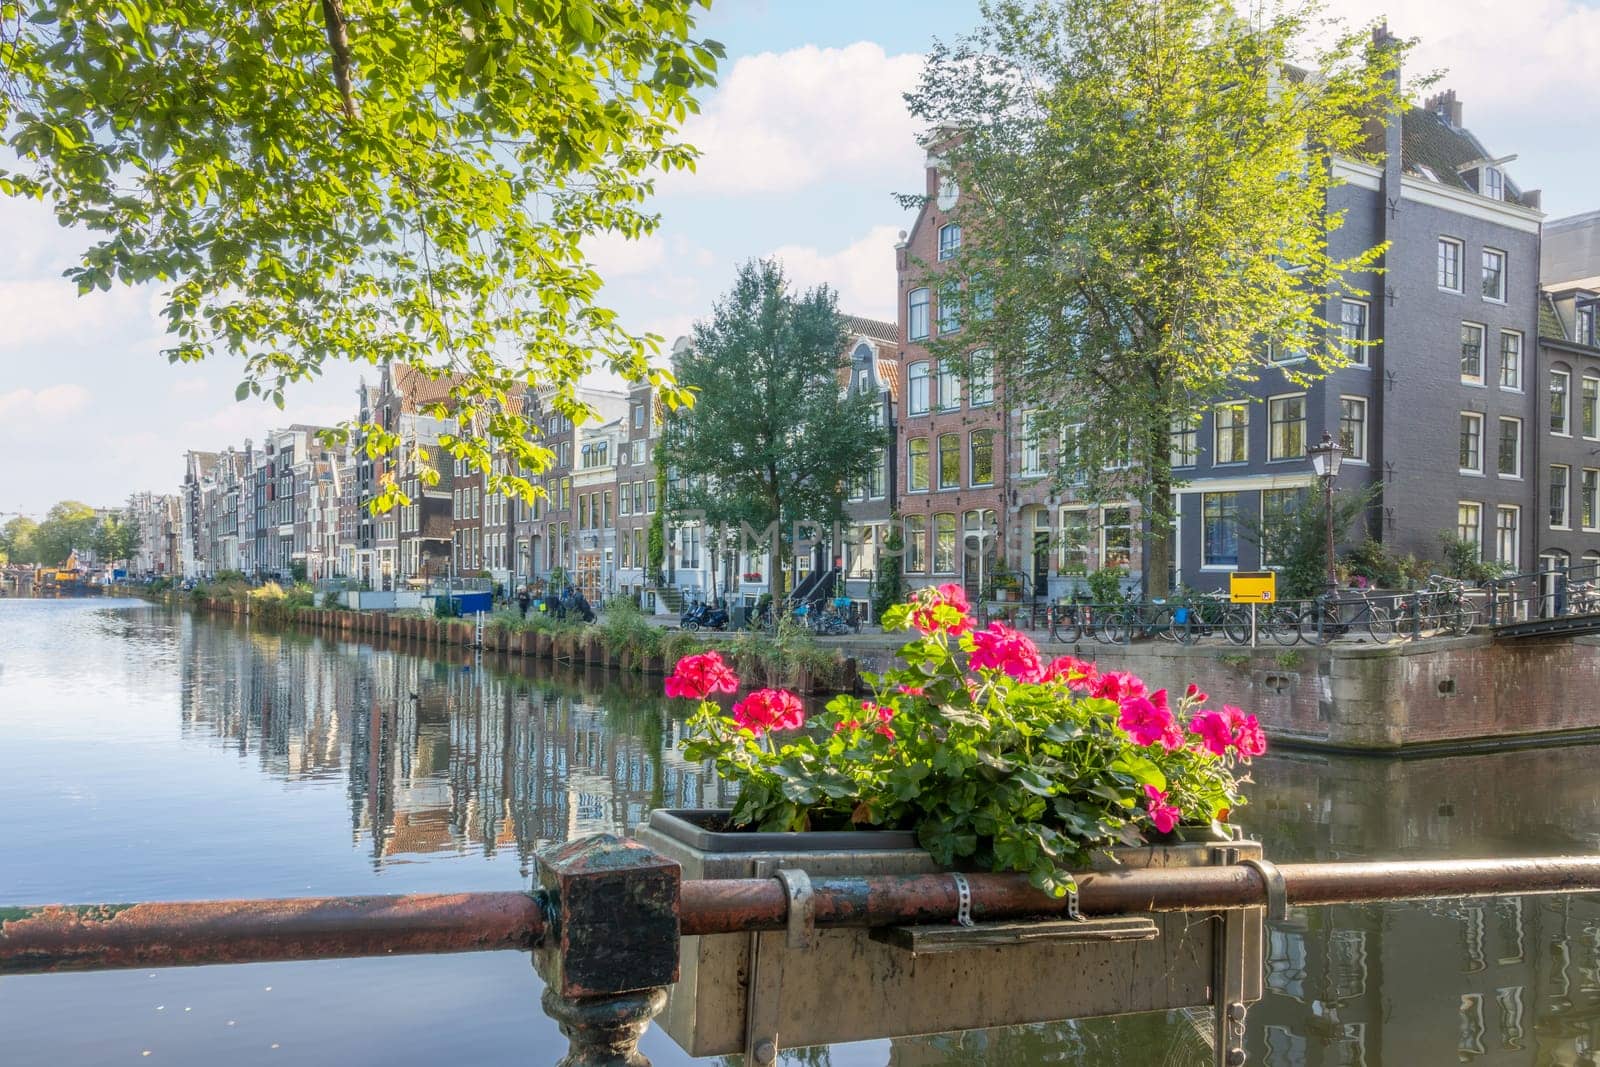 Netherlands. Sunny day on the Amsterdam canal. Typical Dutch buildings on the waterfront. Bright flowers in the foreground